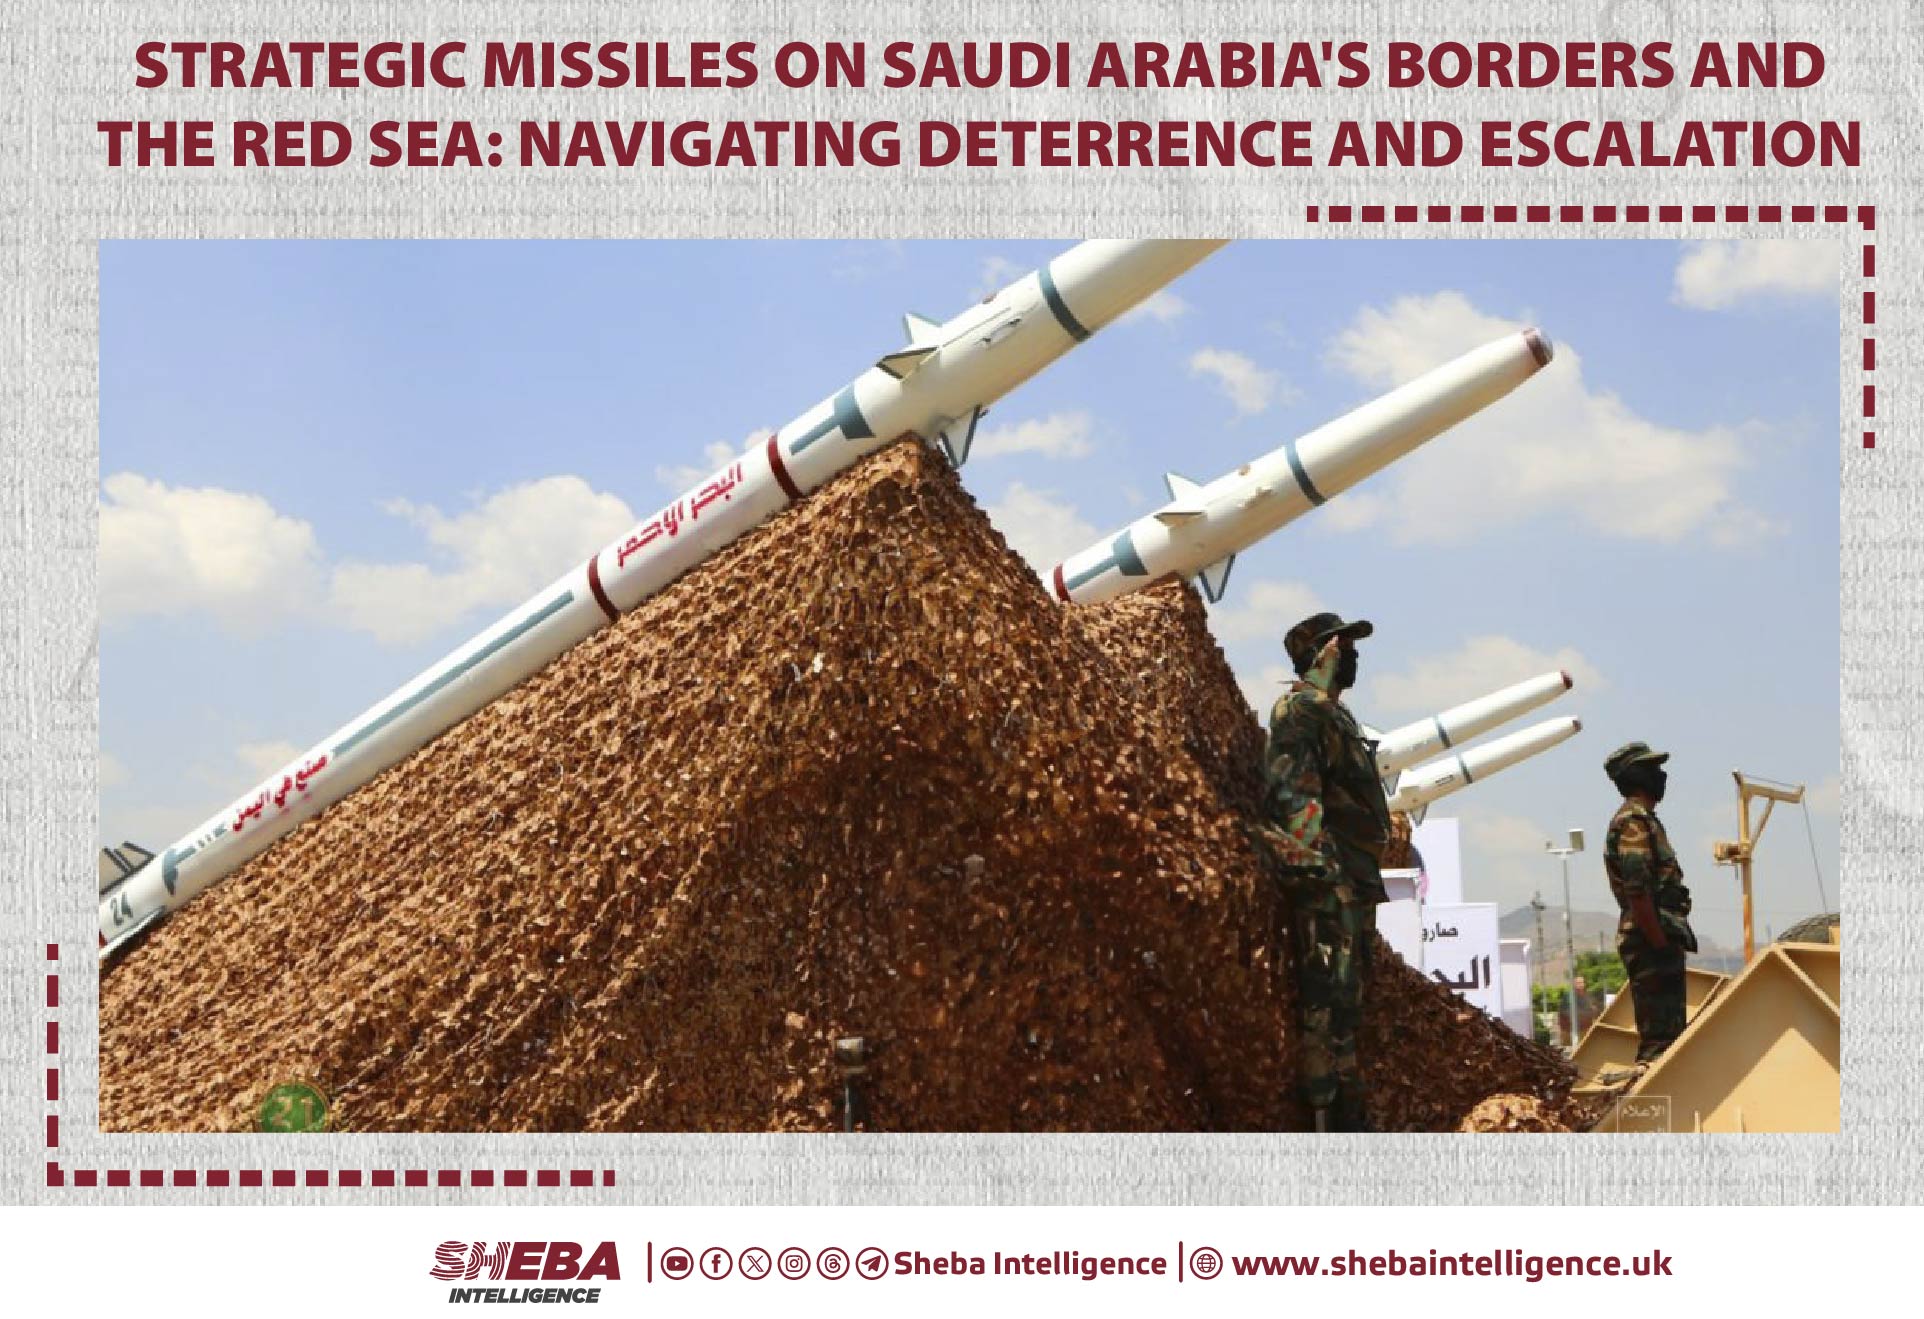 Strategic Missiles on Saudi Arabia's Borders and the Red Sea: Navigating Deterrence and Escalation